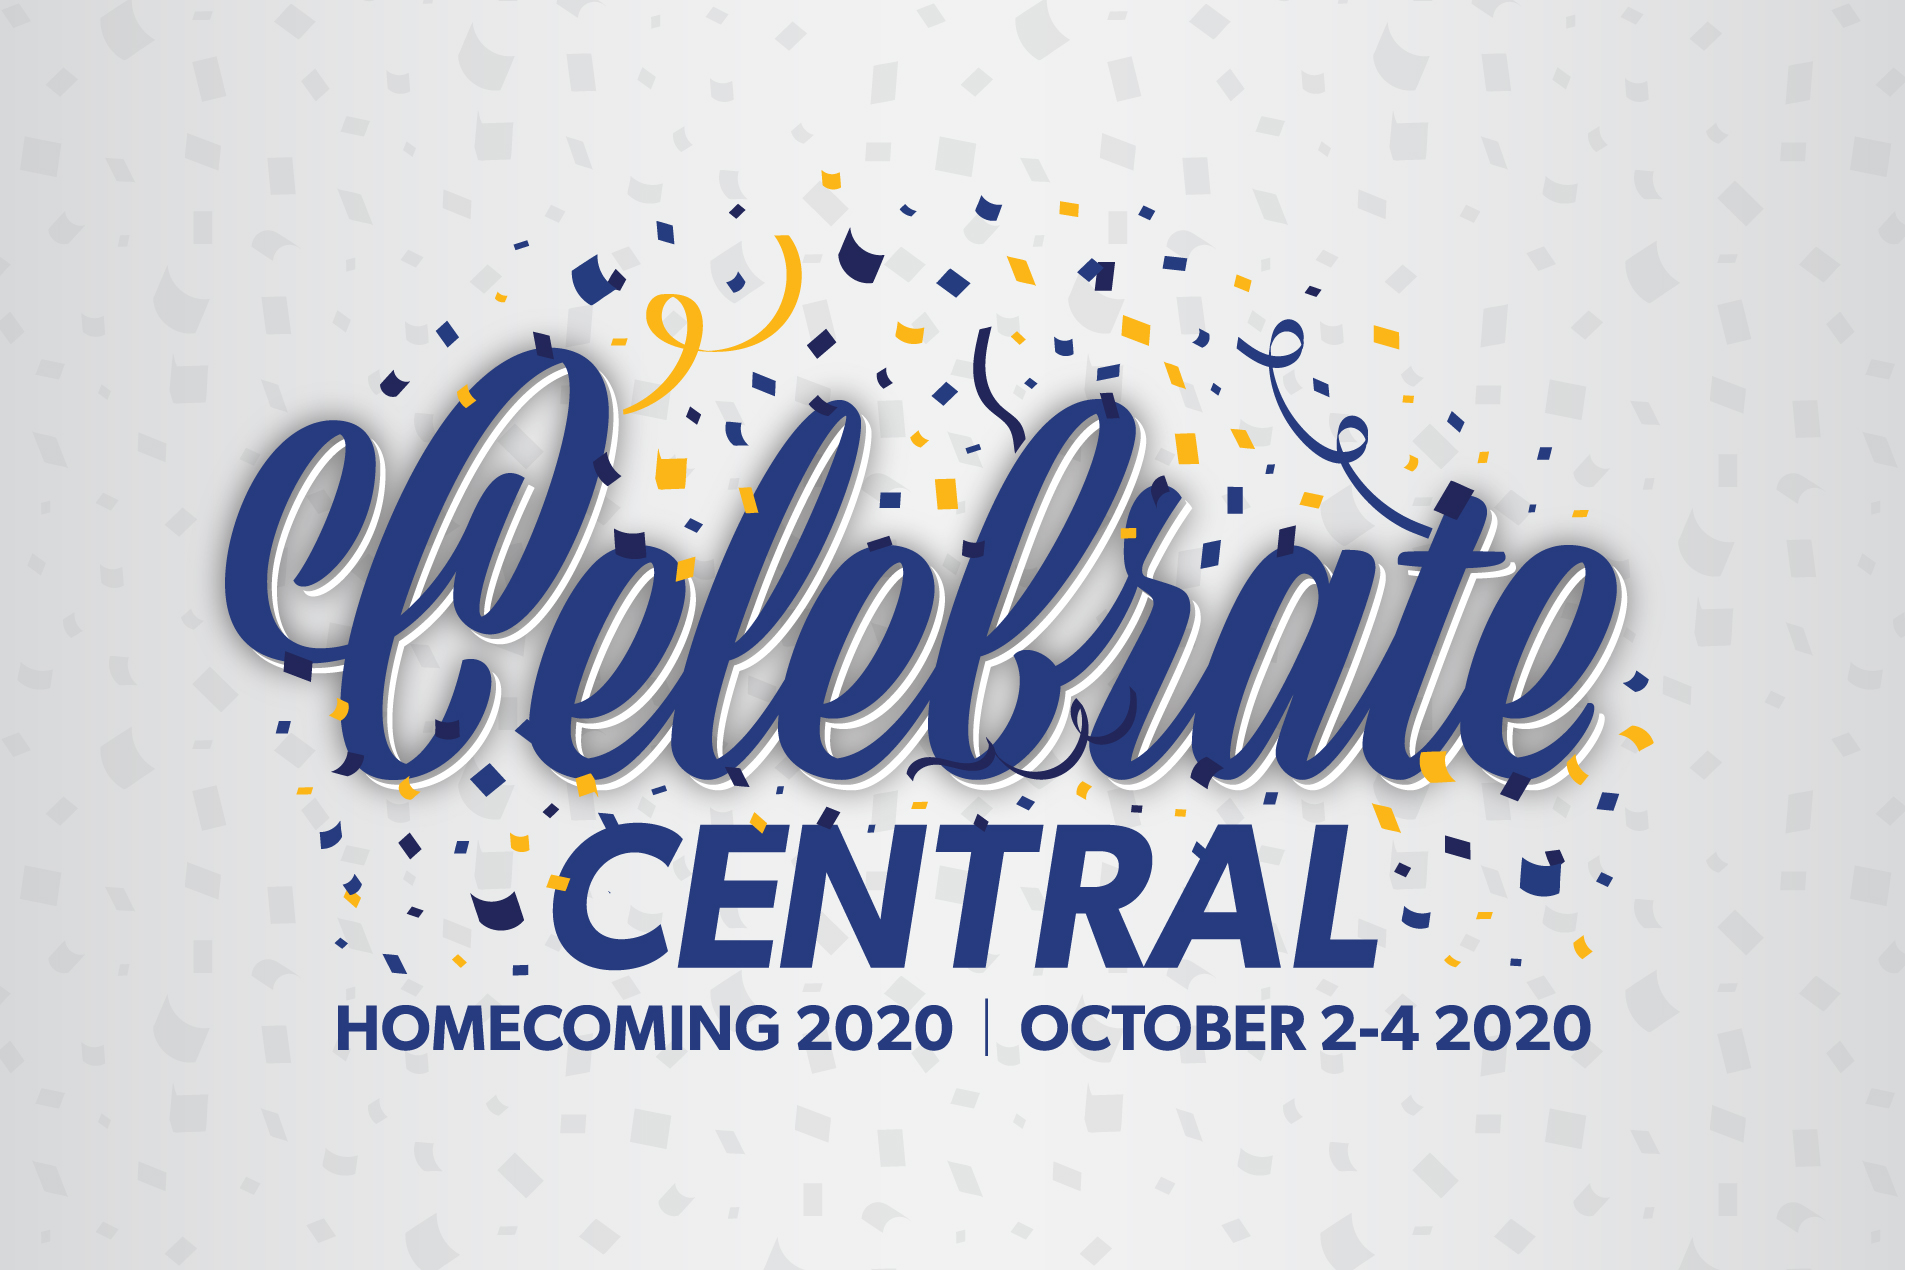 Celebrate Central - Homecoming 2020